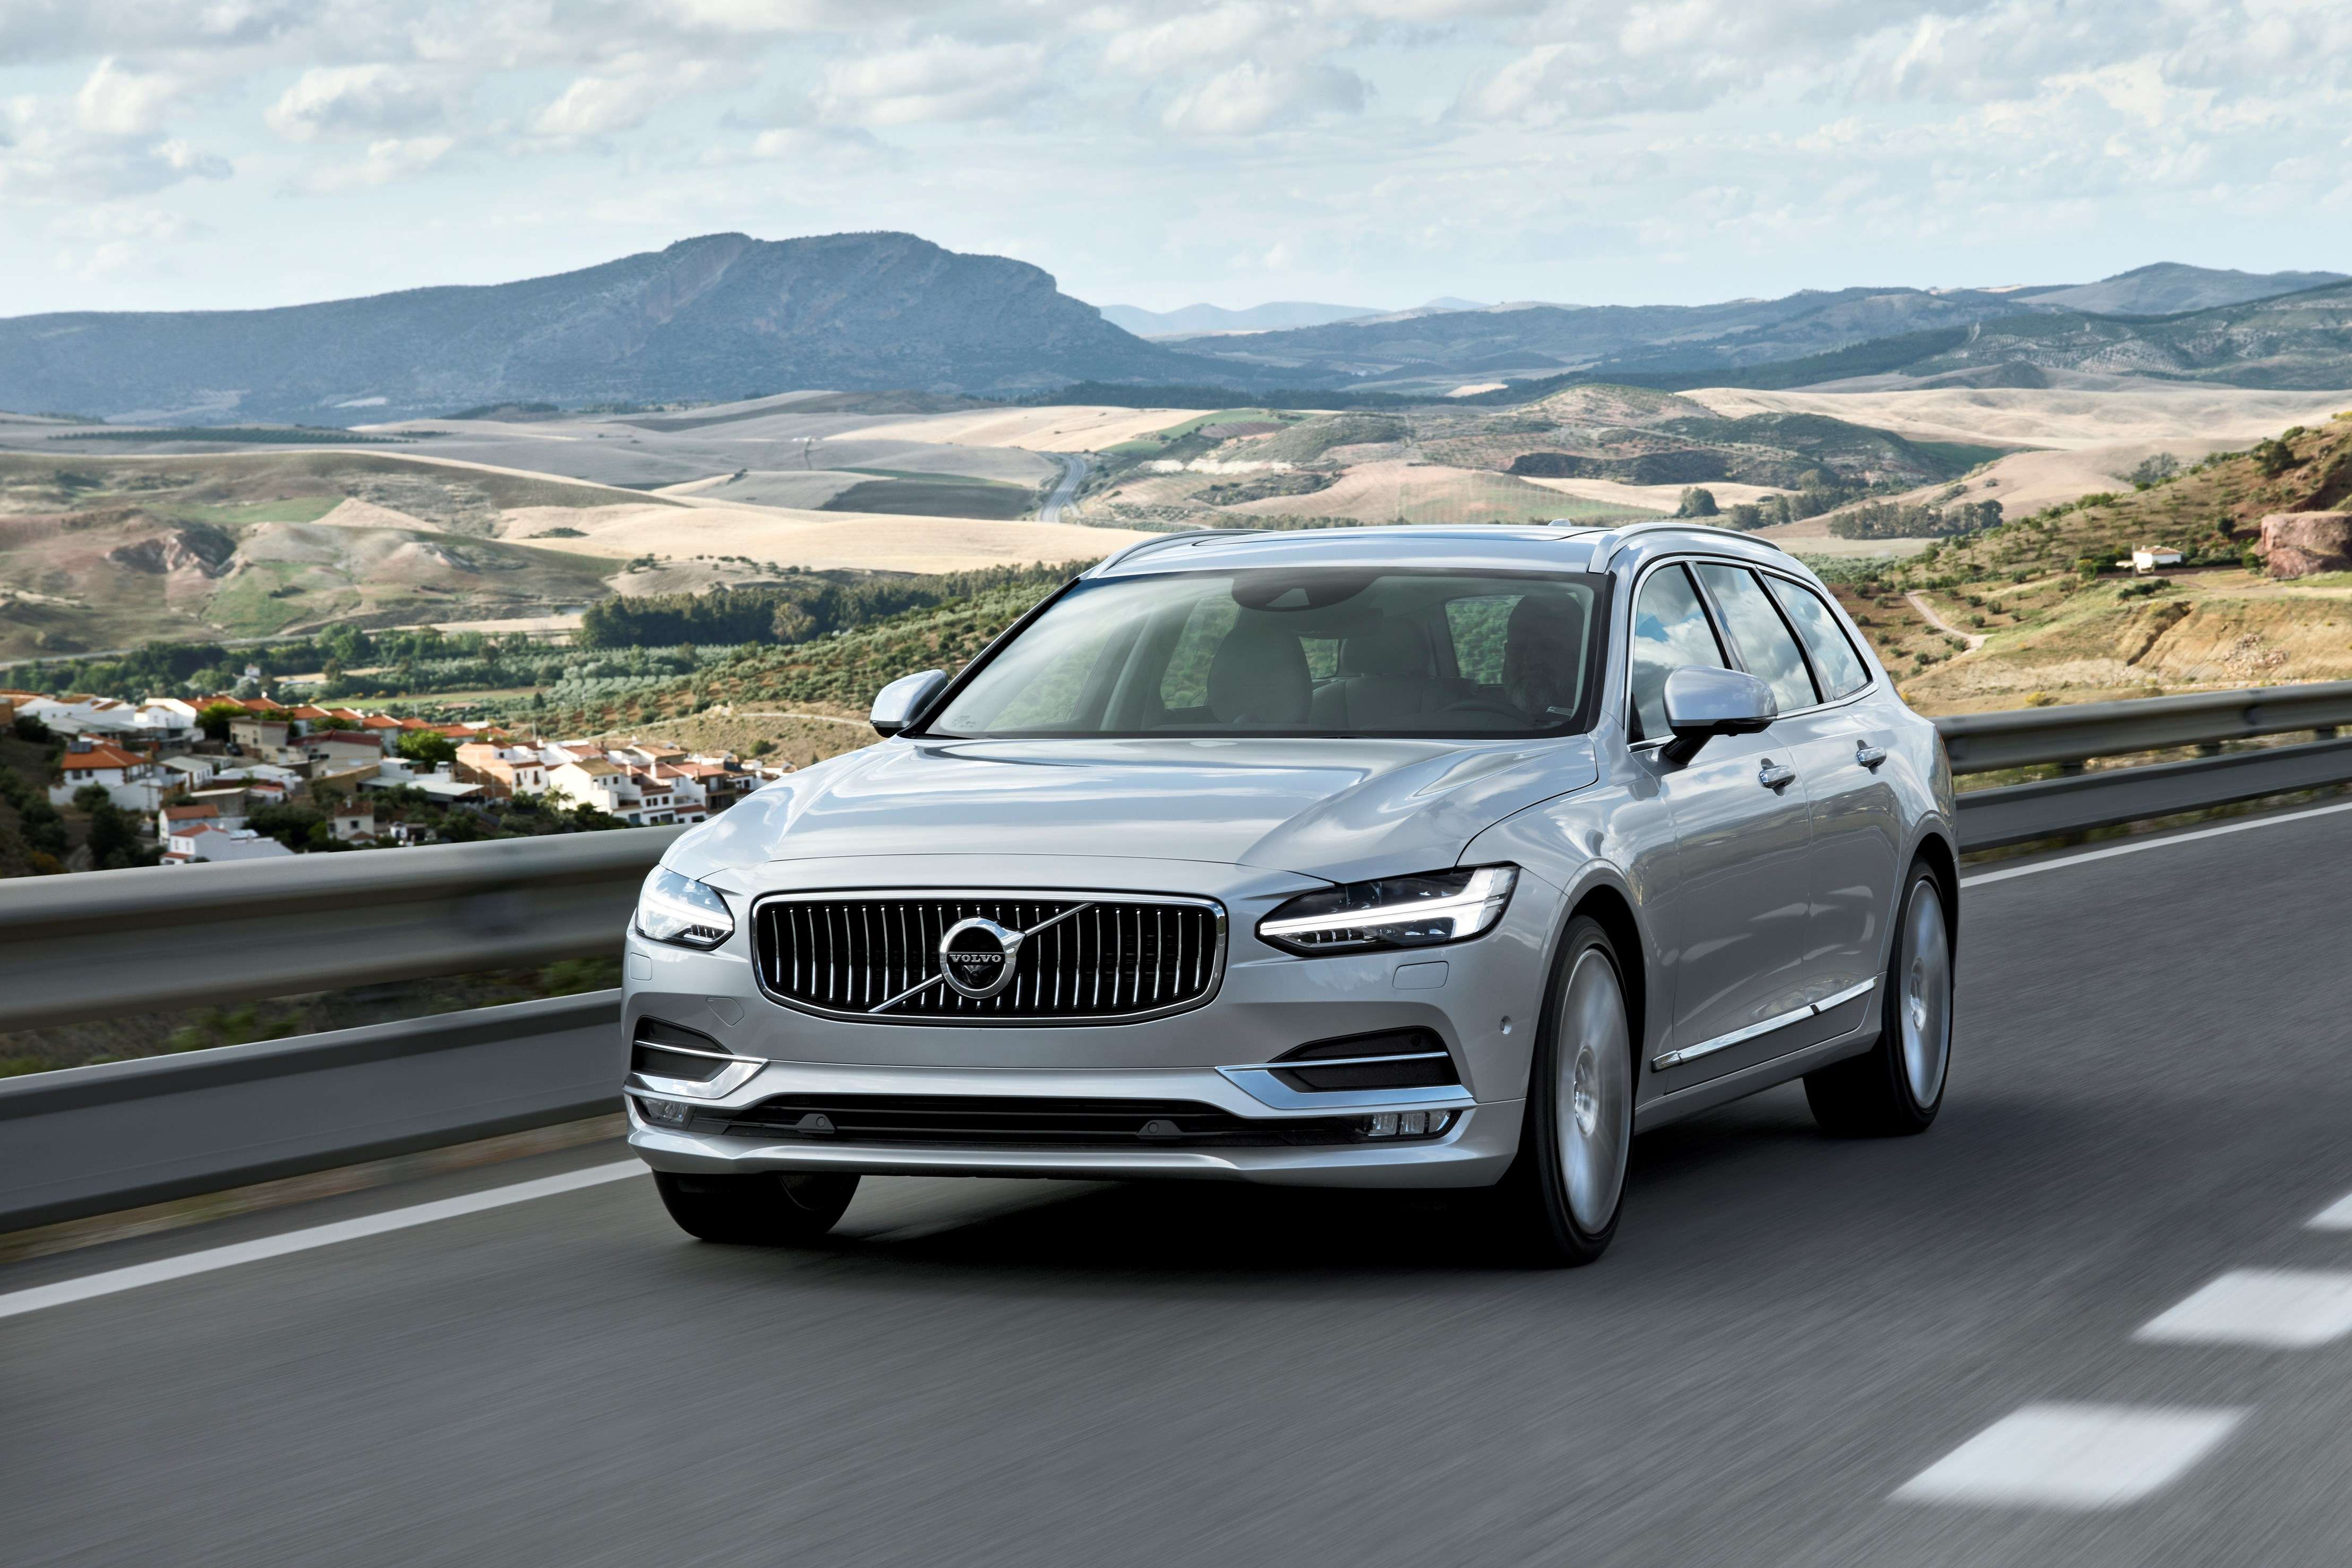 The Volvo V90 V90 is the beefier, better-fed descendant of each generation of a car that’s taken 60 years of refinement to reach this zenith of practicality and style. Photo: Newspress